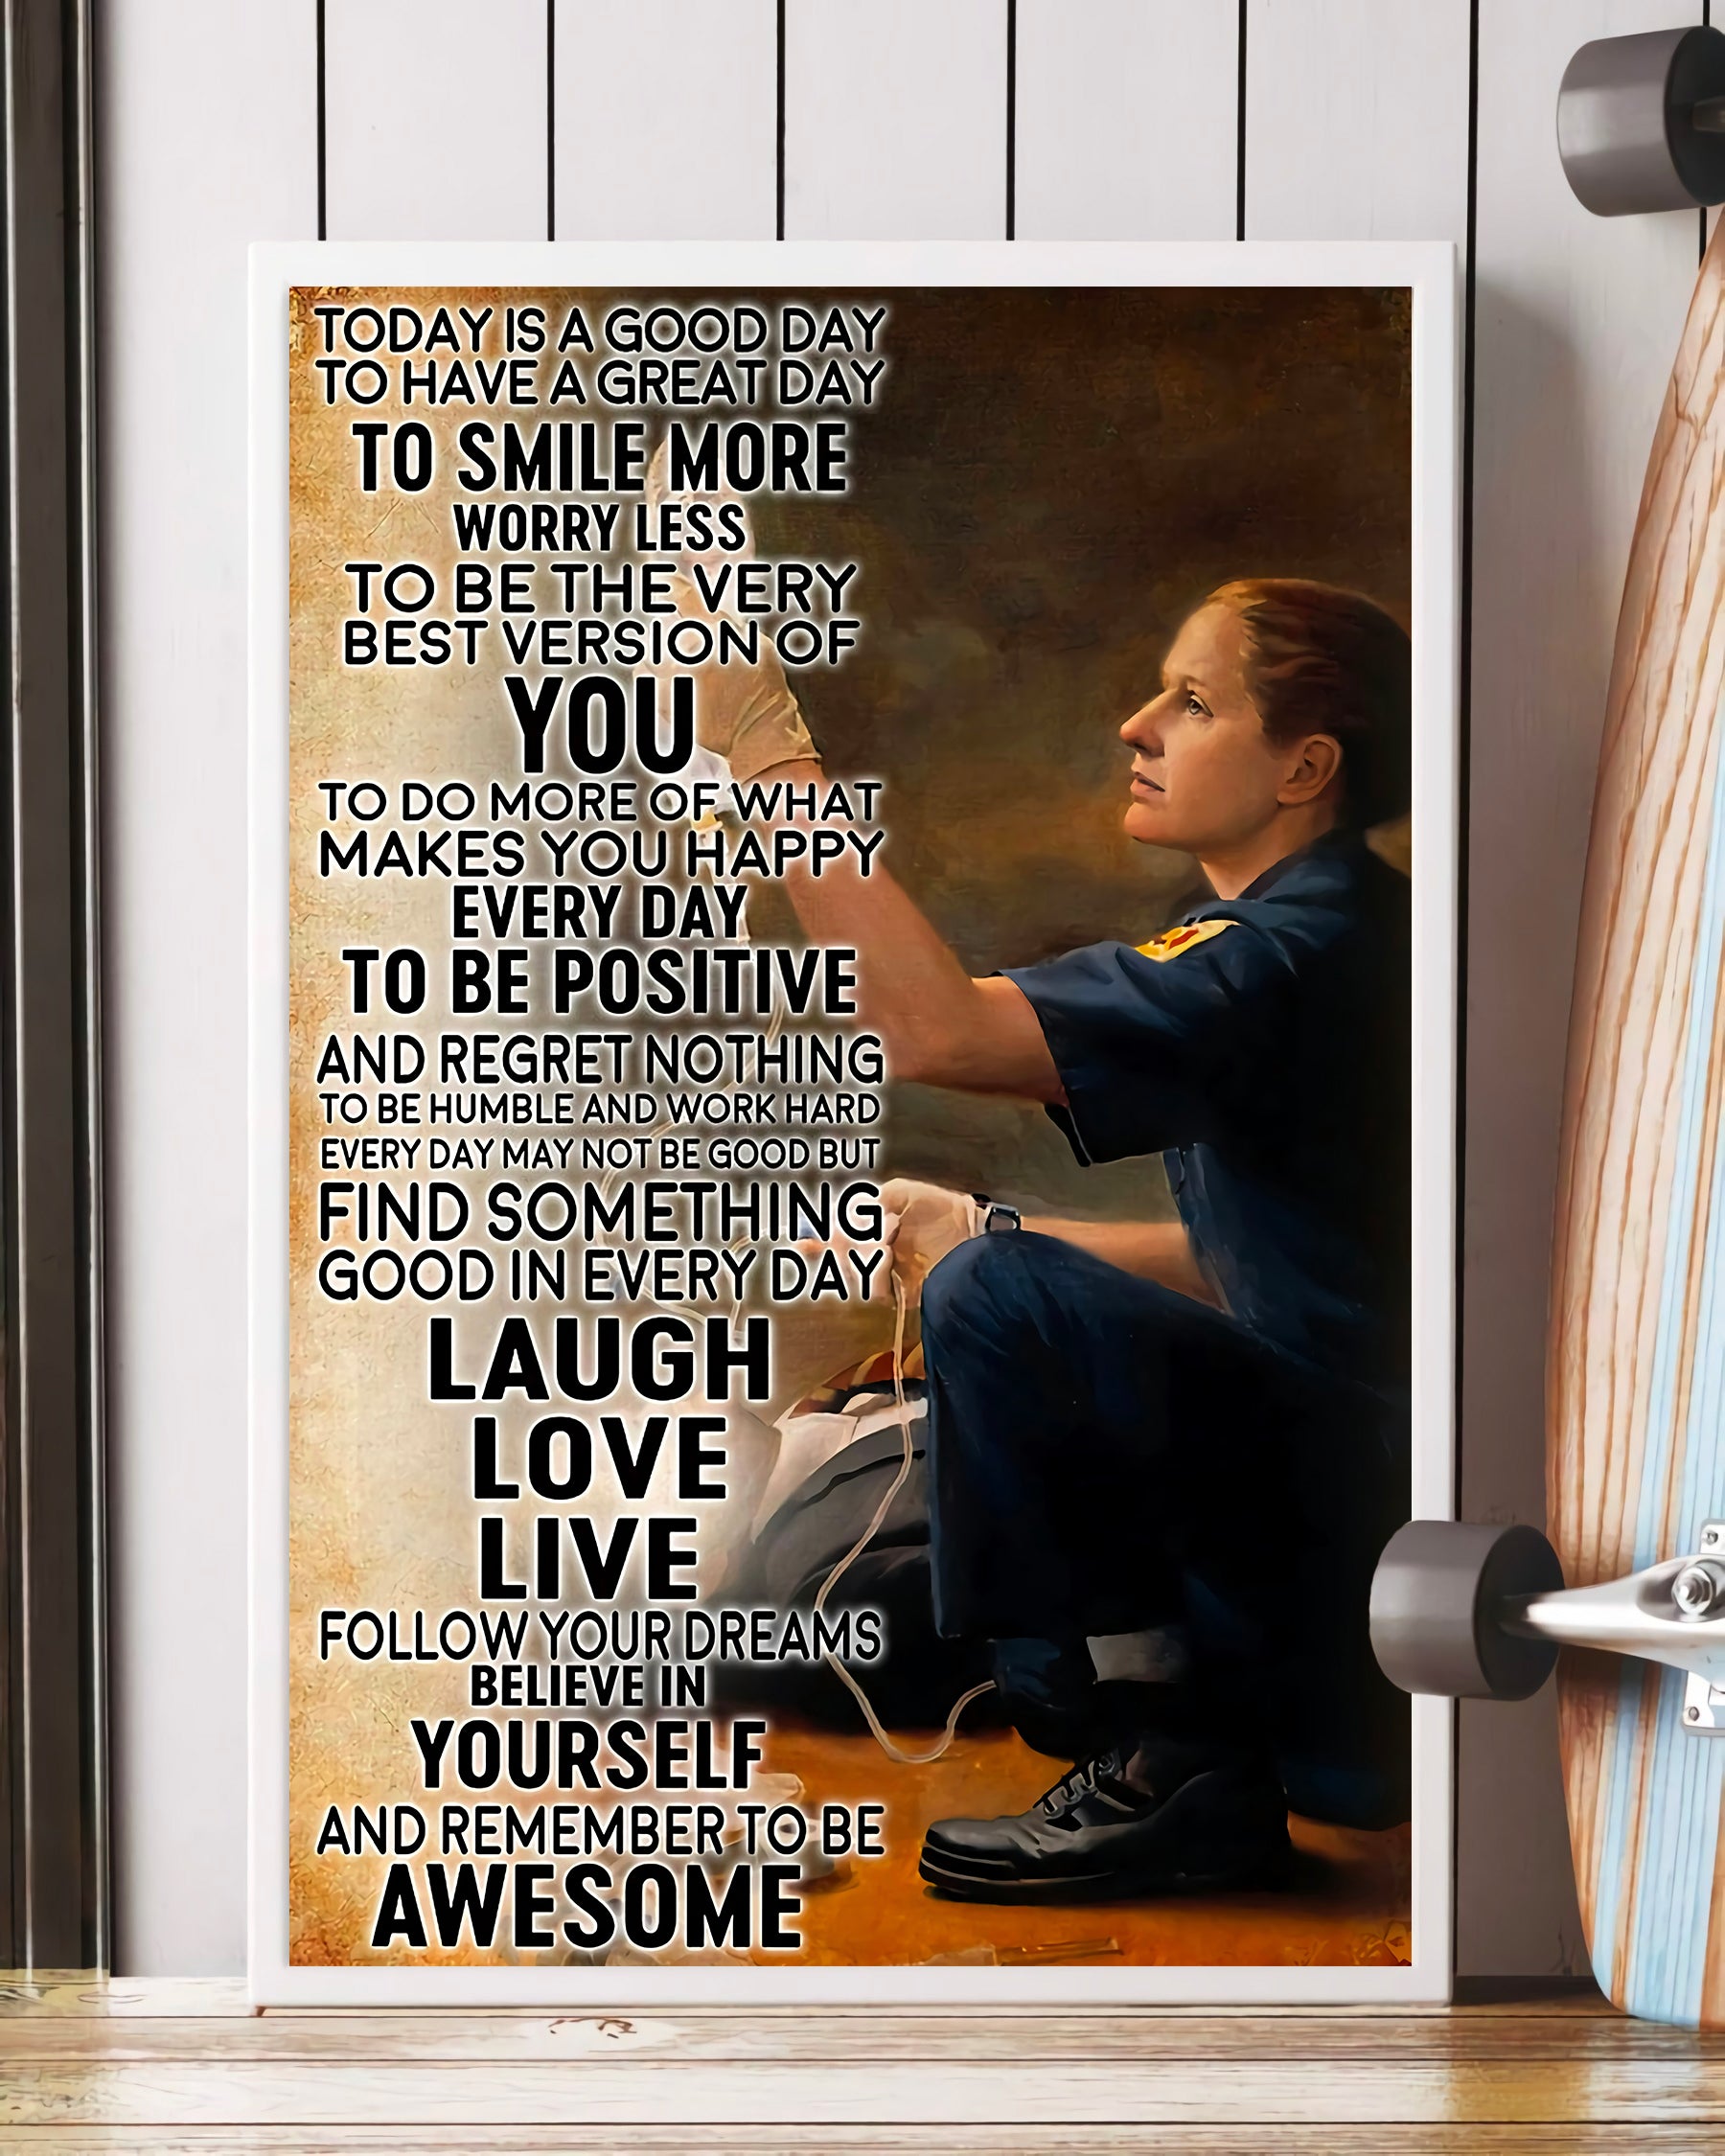 Today is a good day to have a great day to smile more worry less to be the very best version of you Standard Poster